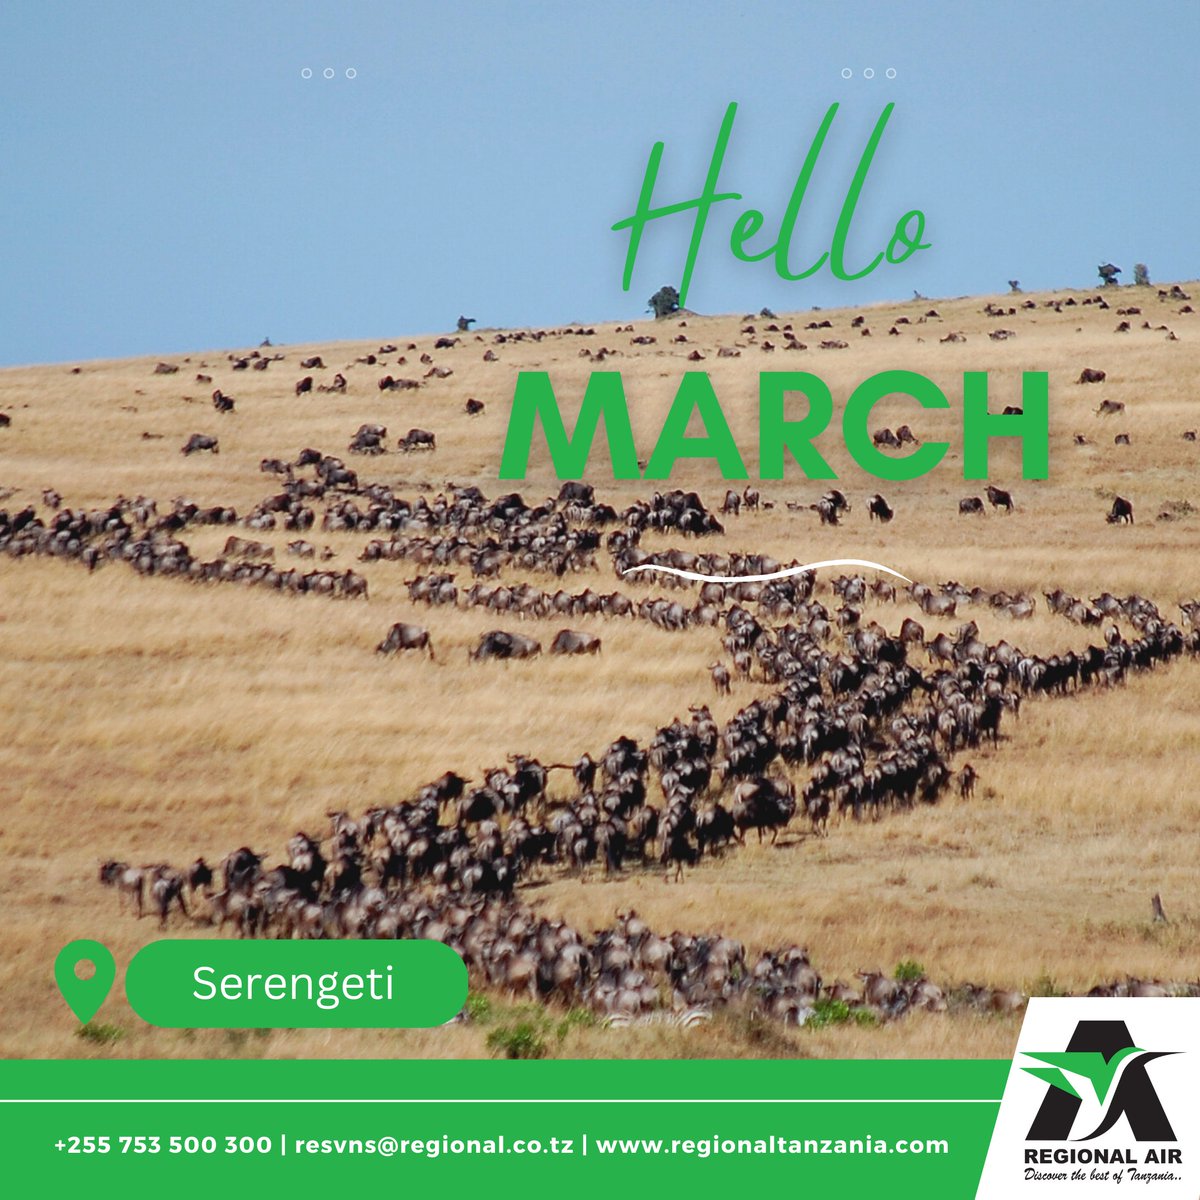 #HappyNewMonth #FollowTheMigration
#March to the rhythm of the wild with #RegionalAir #Tanzania as you follow the #wildebeest migration and witness nature's greatest show!
#responsibletourism #ecotourism #localtourism #wildlifewednesday #serengeti #luxurytravel  #safaritravel